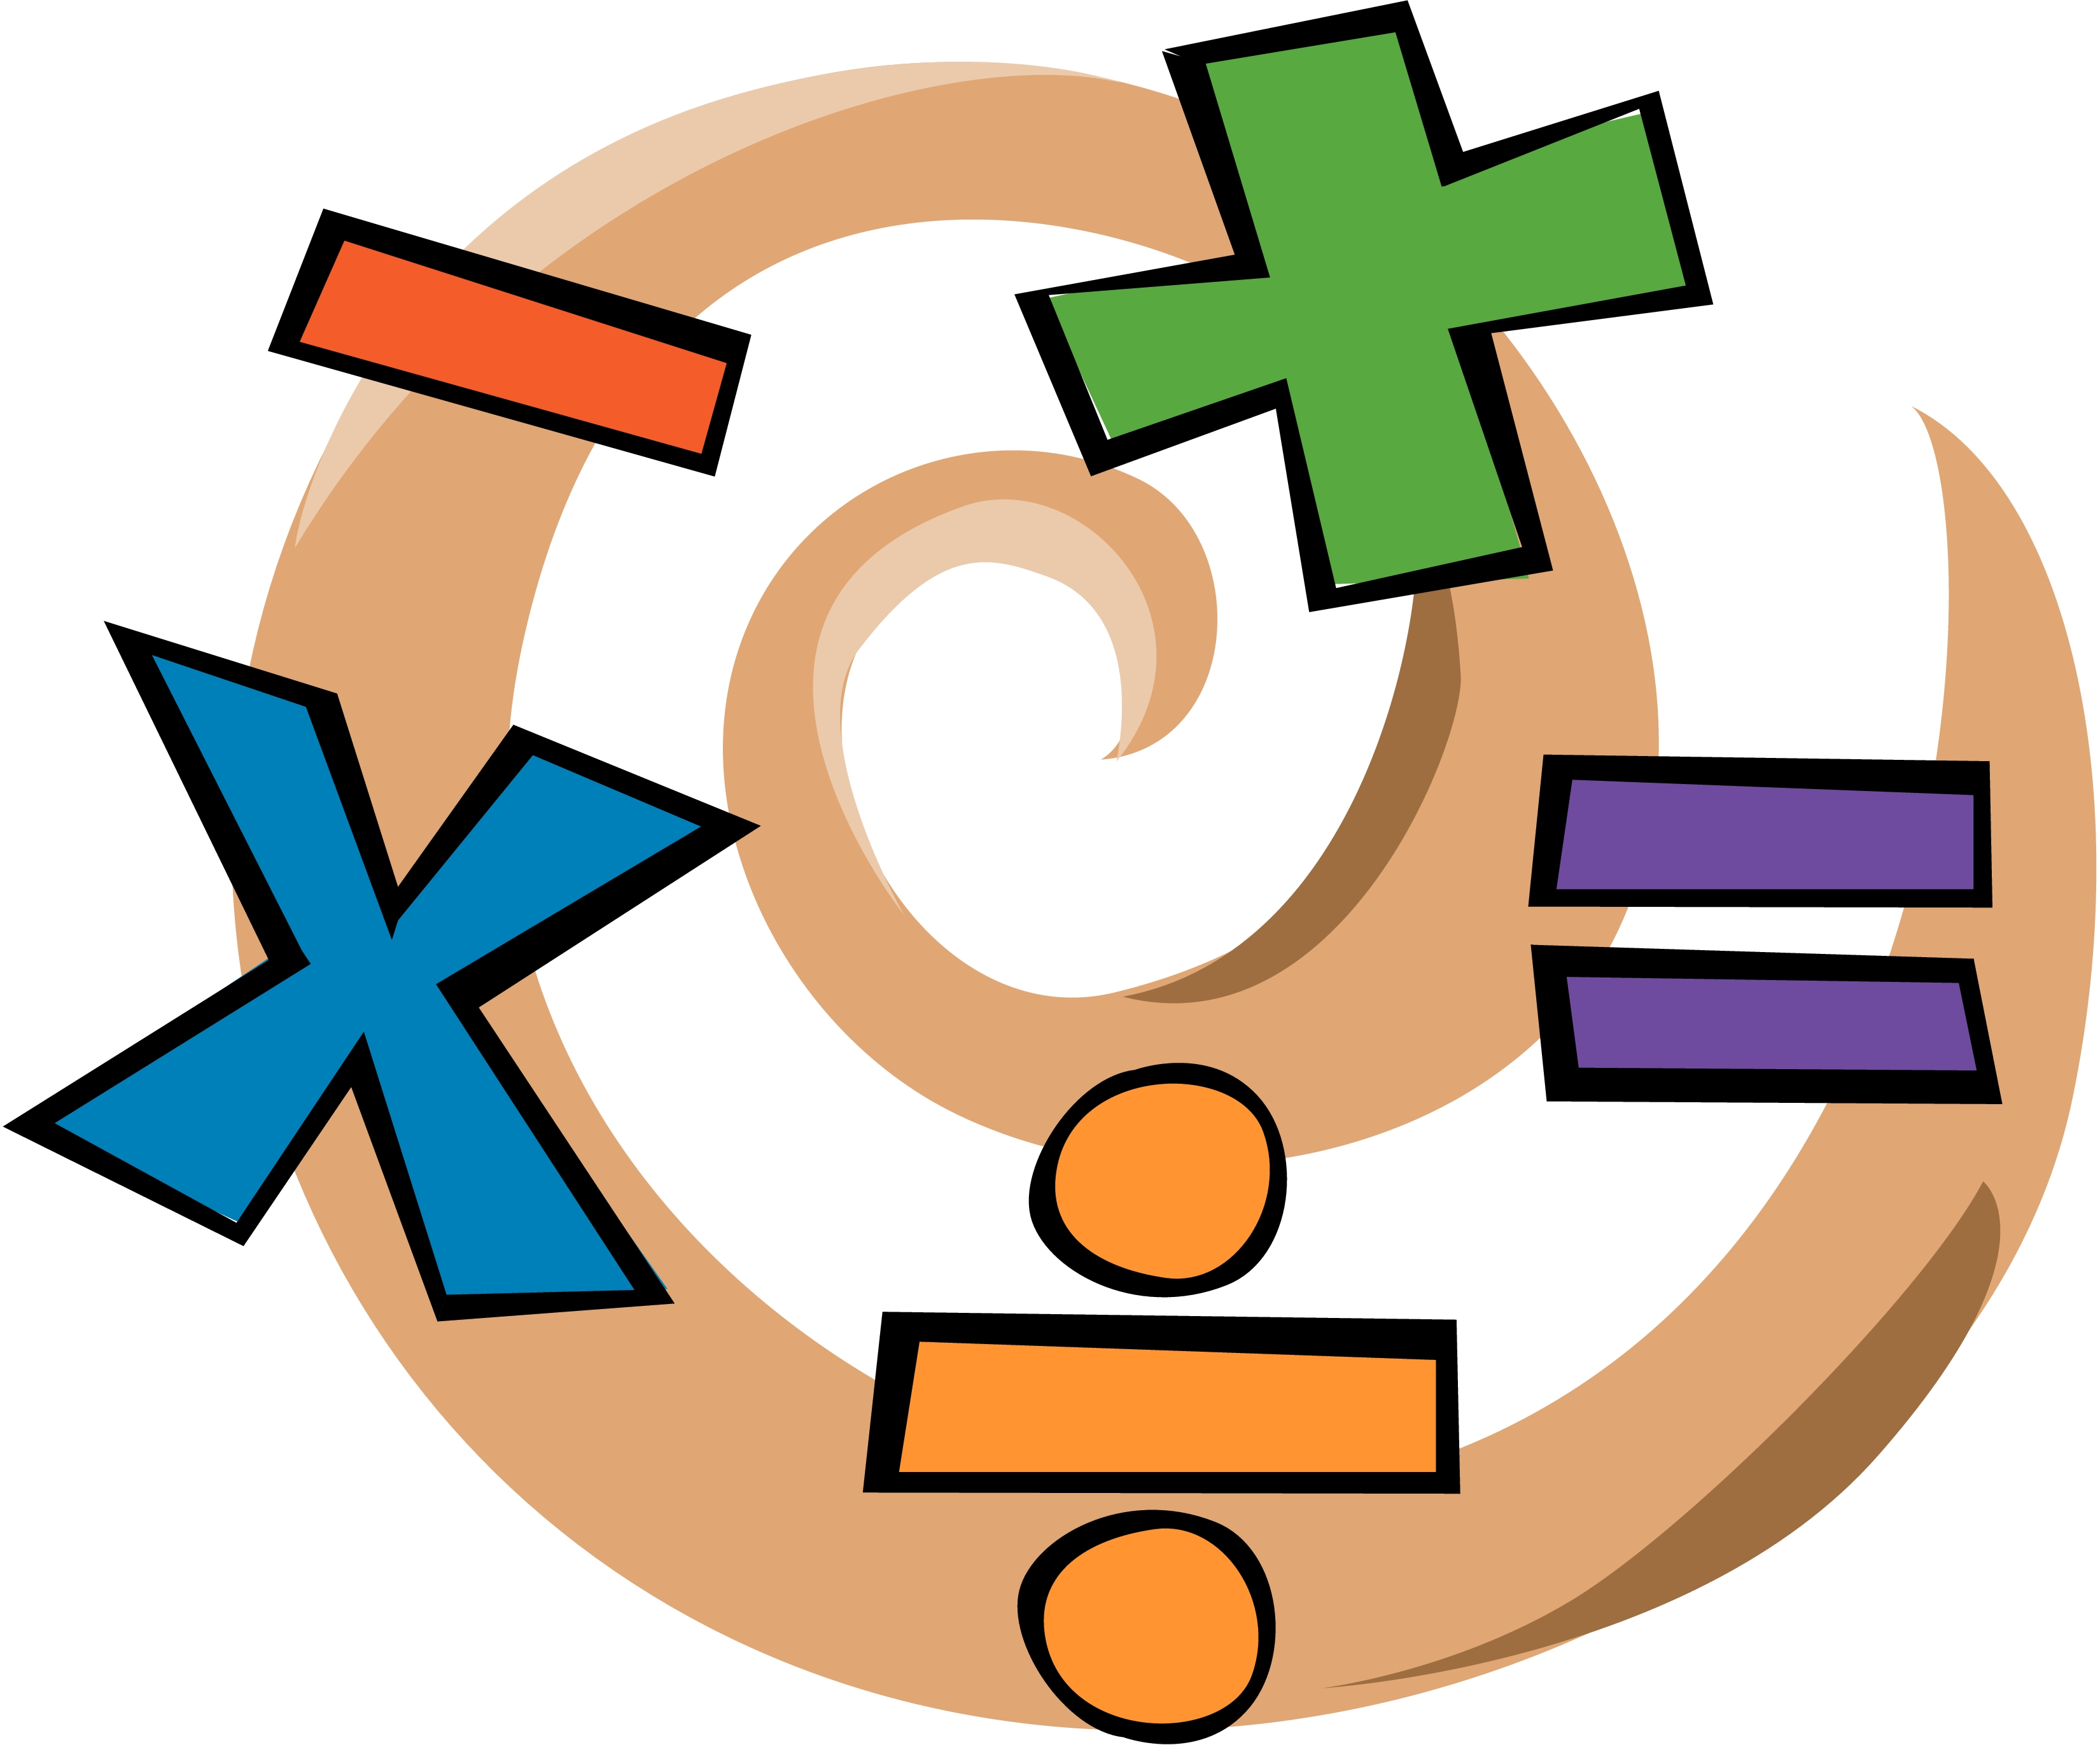 Math Symbols Clipart | Clipart library - Free Clipart Images